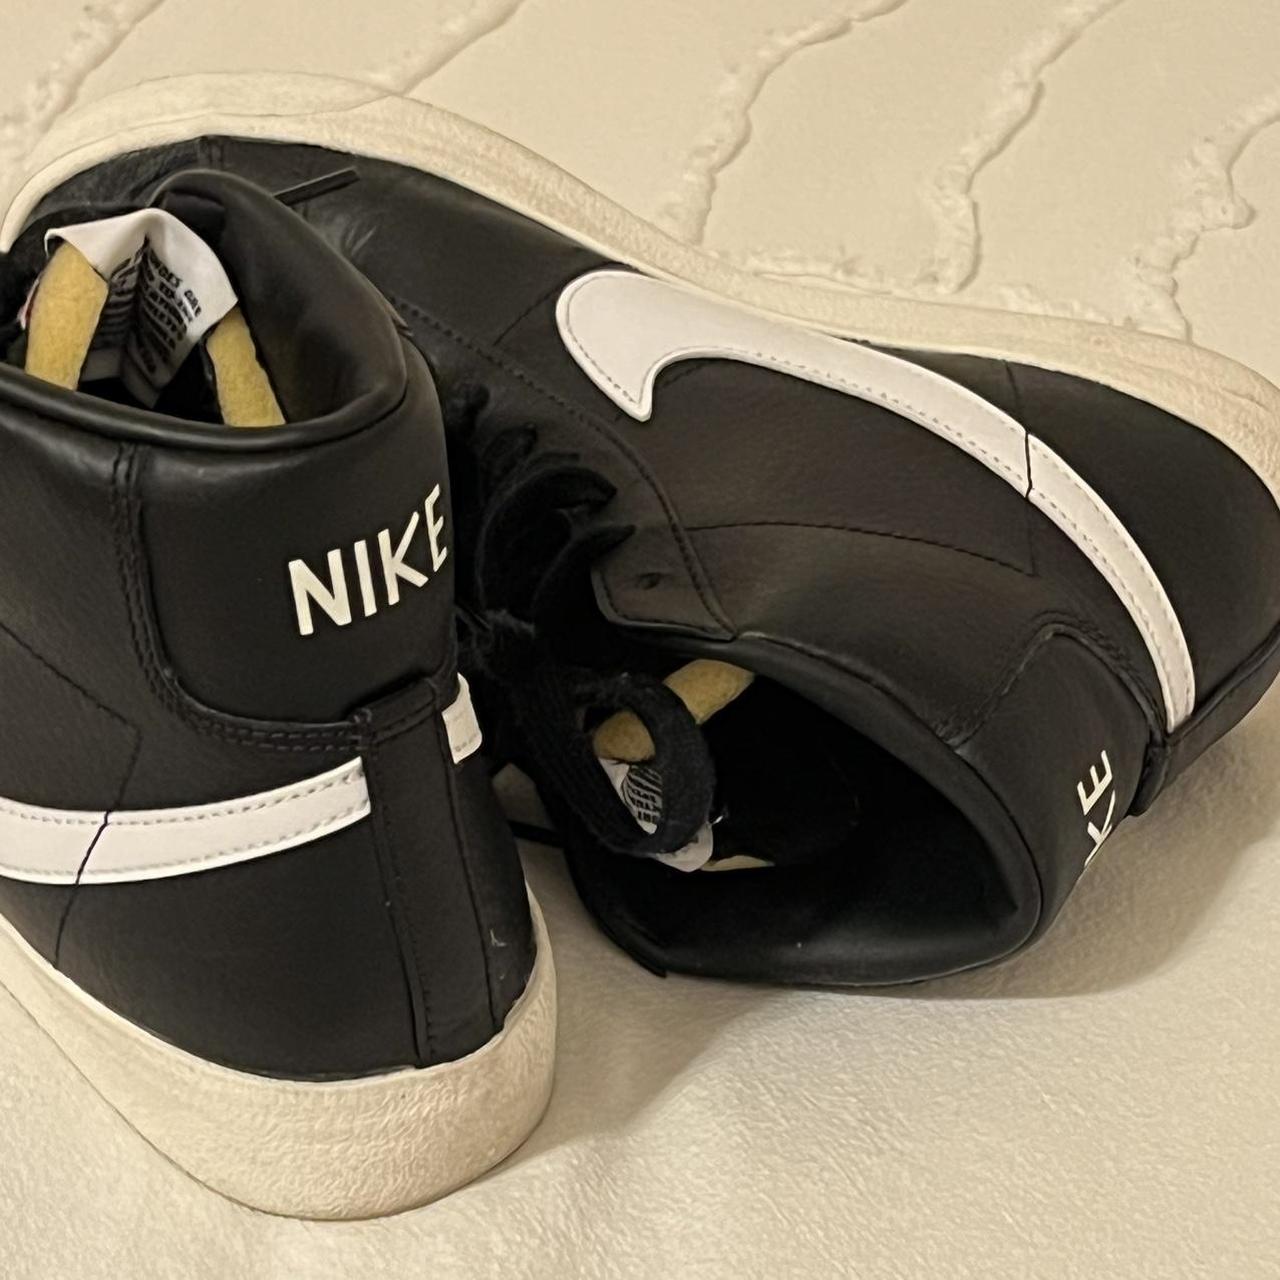 Nike Men's Black and White Trainers (3)